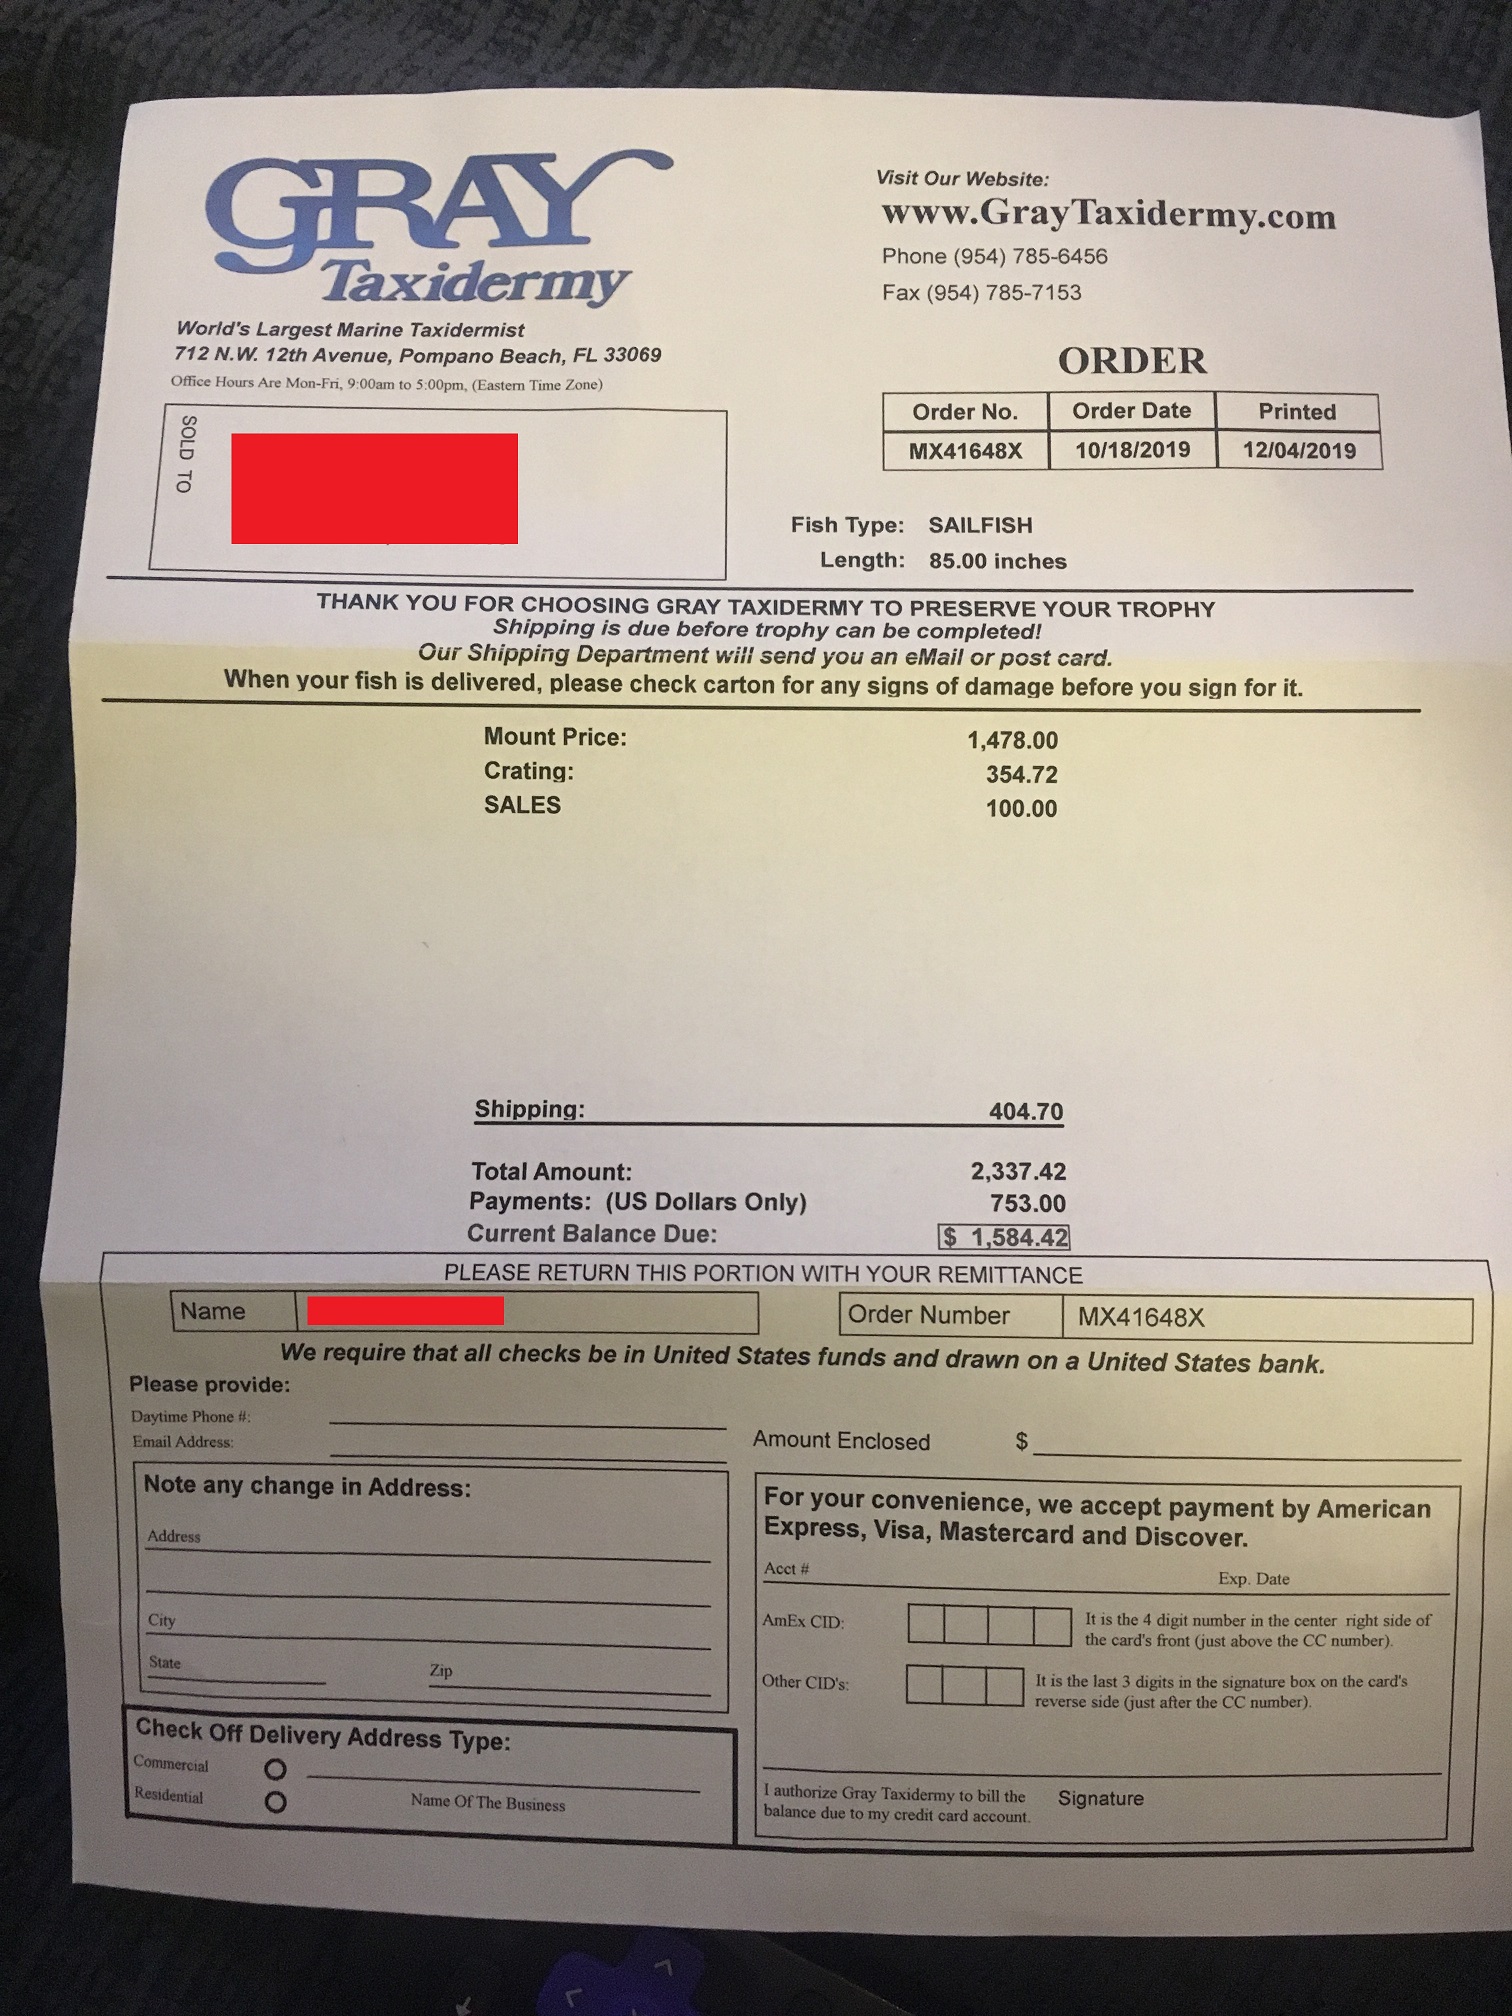 2nd invoice received weeks later-not final charges